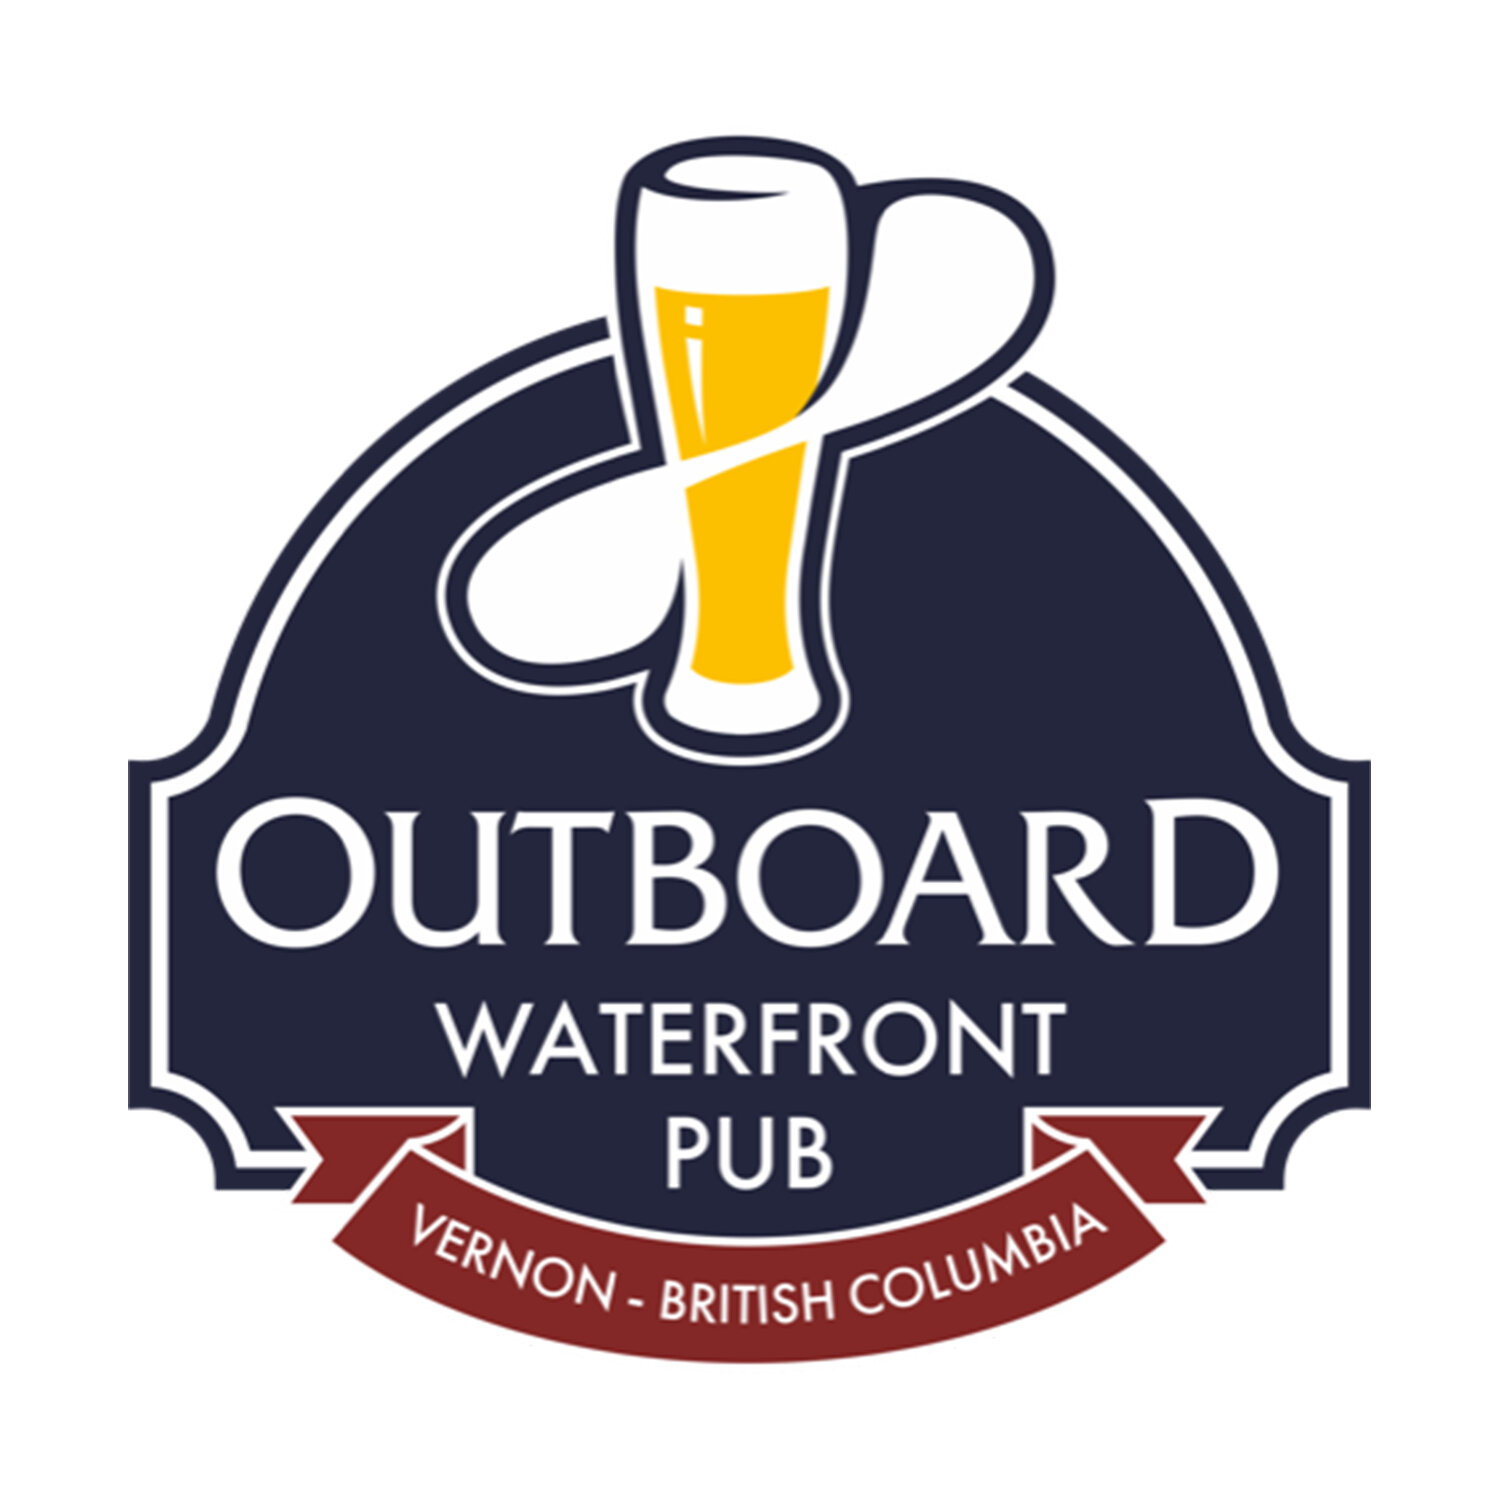 The Outboard Waterfront Pub